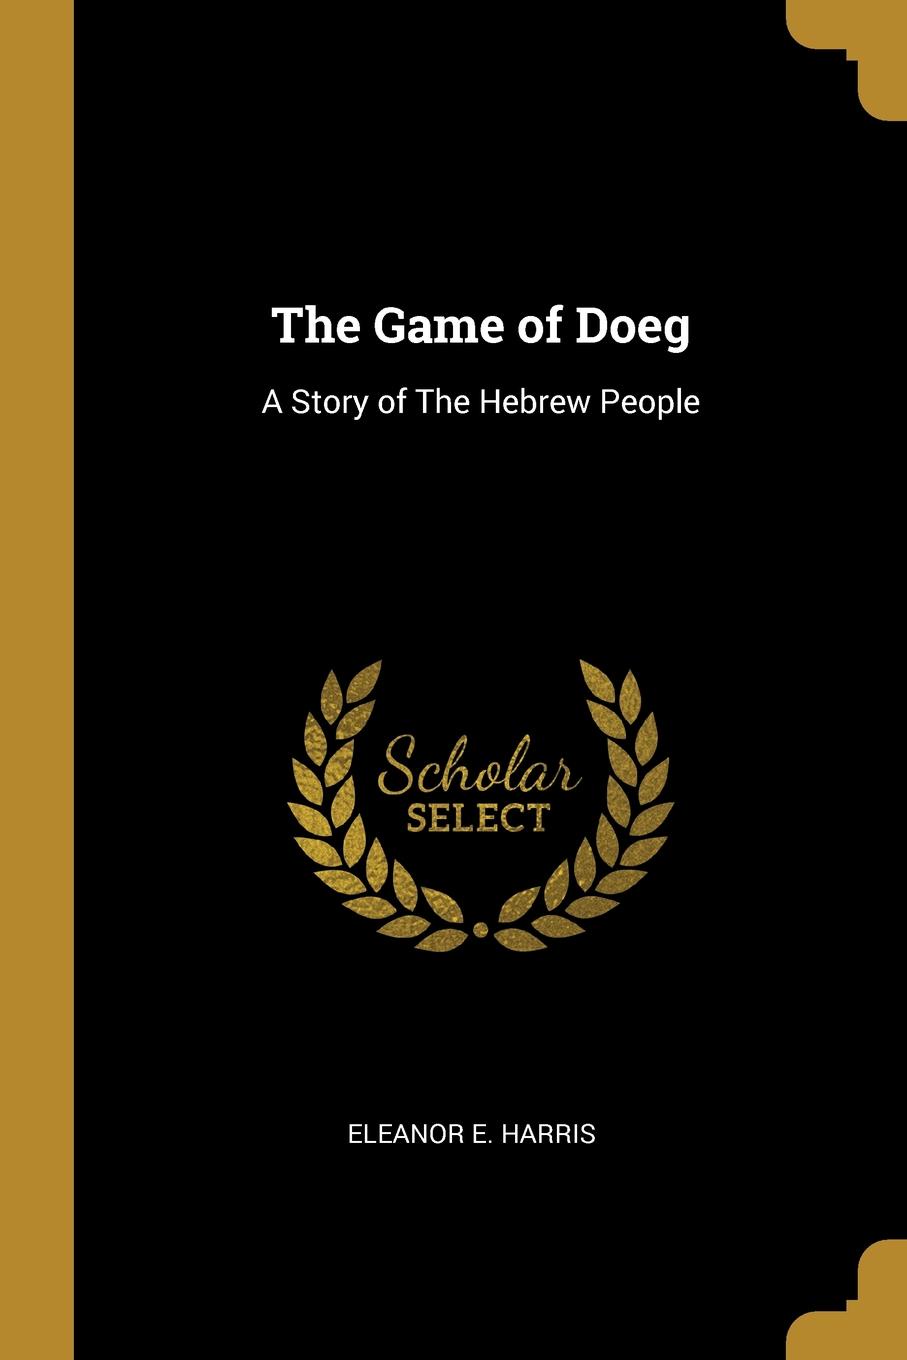 The Game of Doeg. A Story of The Hebrew People